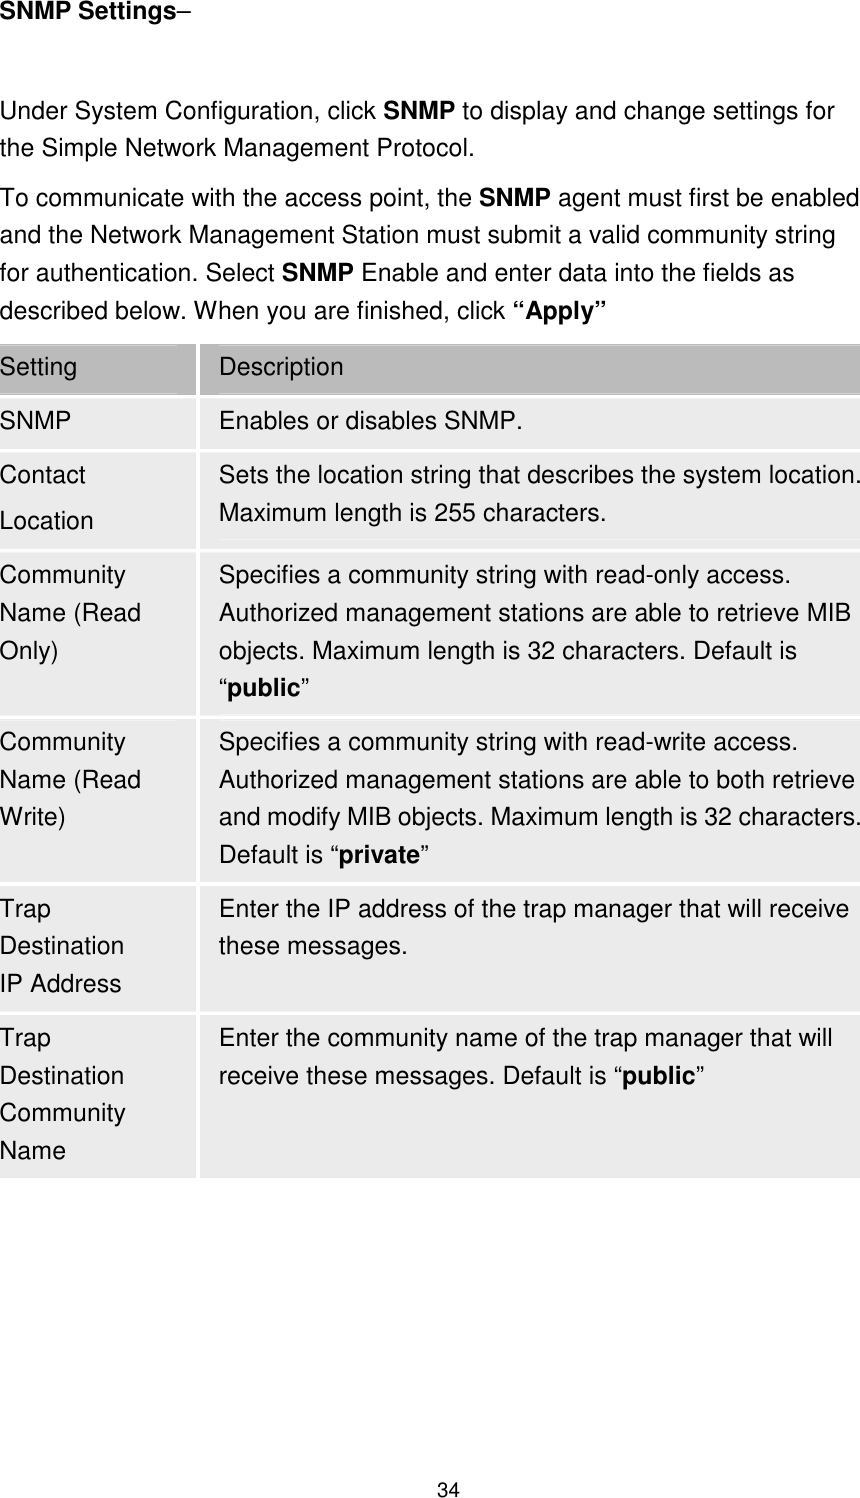  34 SNMP Settings–  Under System Configuration, click SNMP to display and change settings for the Simple Network Management Protocol. To communicate with the access point, the SNMP agent must first be enabled and the Network Management Station must submit a valid community string for authentication. Select SNMP Enable and enter data into the fields as described below. When you are finished, click “Apply” Setting  Description SNMP  Enables or disables SNMP. Contact Location Sets the location string that describes the system location. Maximum length is 255 characters. Community Name (Read Only) Specifies a community string with read-only access. Authorized management stations are able to retrieve MIB objects. Maximum length is 32 characters. Default is “public” Community Name (Read Write) Specifies a community string with read-write access. Authorized management stations are able to both retrieve and modify MIB objects. Maximum length is 32 characters. Default is “private” Trap Destination   IP Address Enter the IP address of the trap manager that will receive these messages. Trap Destination Community Name Enter the community name of the trap manager that will receive these messages. Default is “public” 